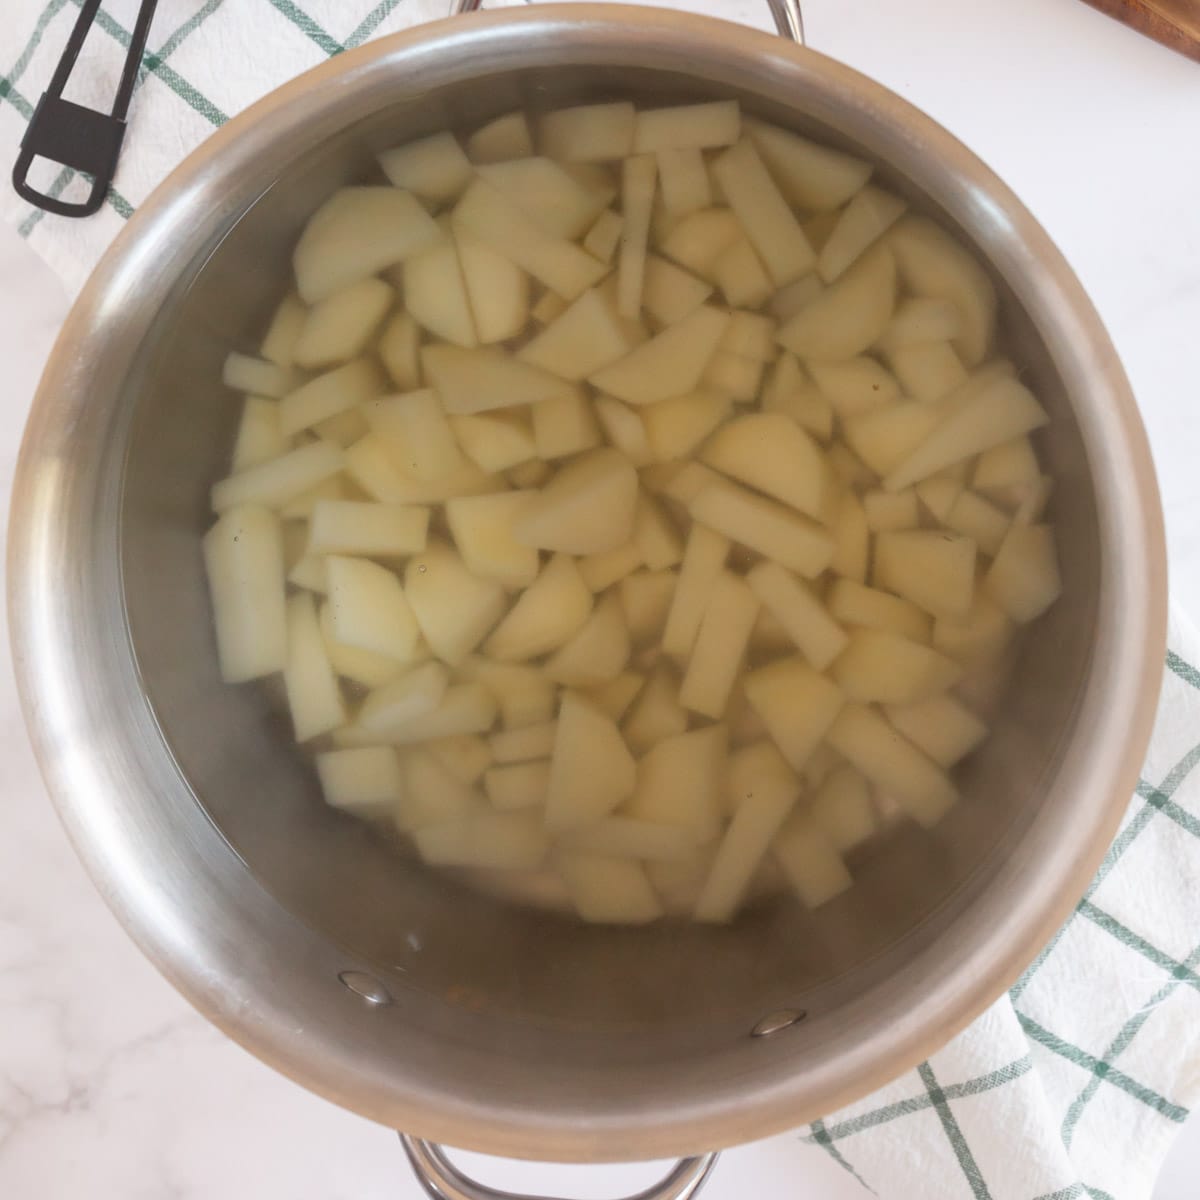 A metal pot with diced potatoes and water